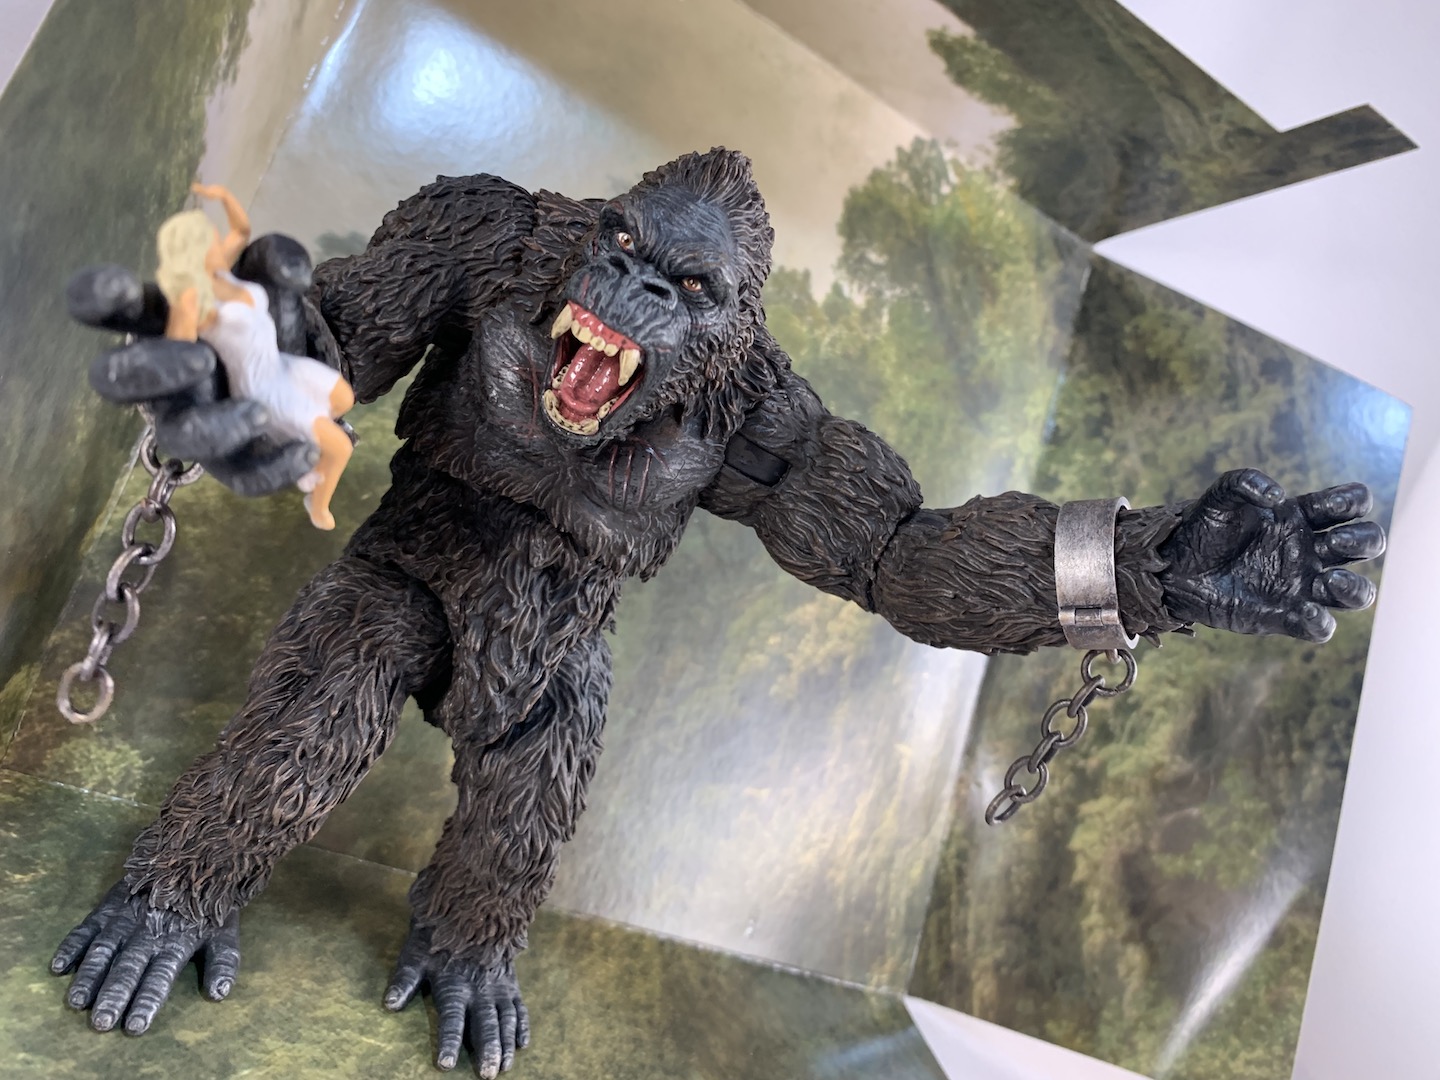 Unboxing the King Kong of Skull Island 7-inch action figure